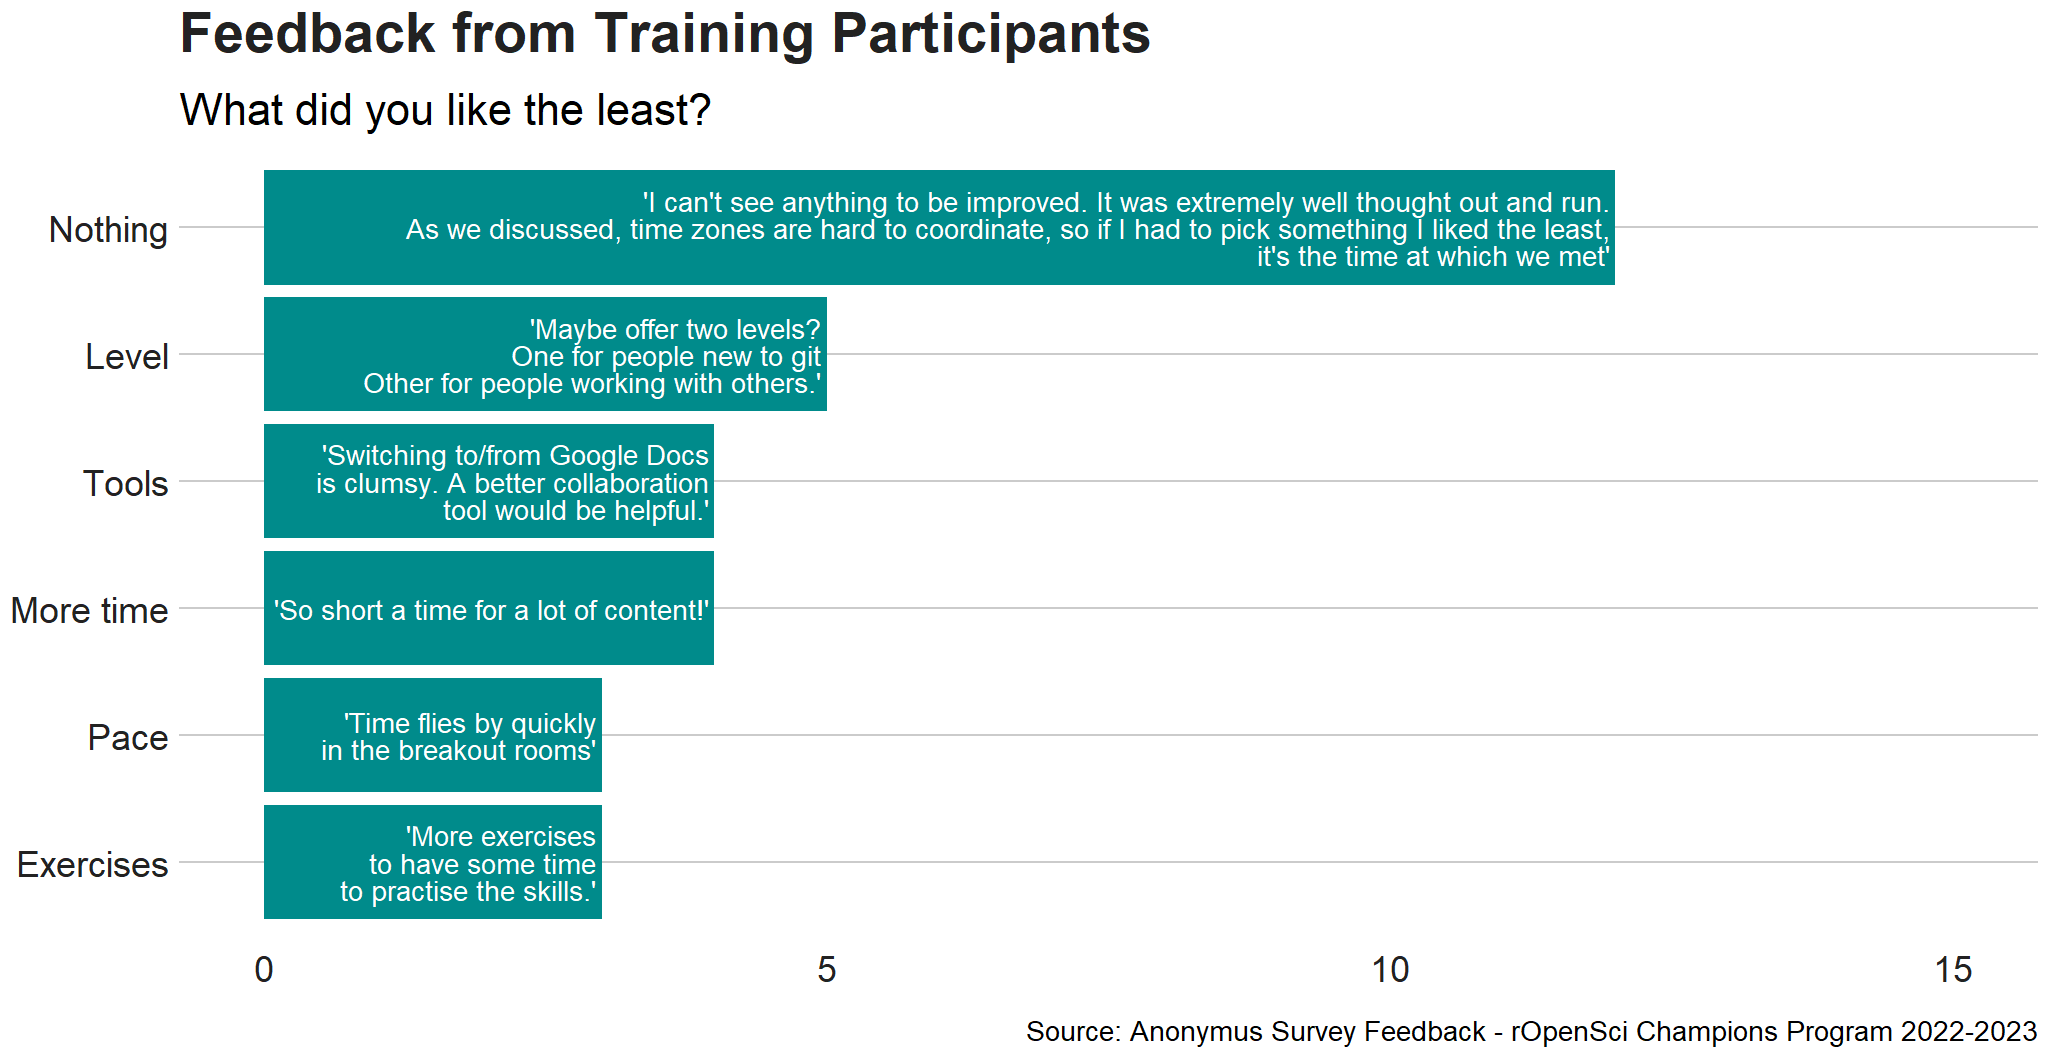 Ranked quantities of five areas of improvement in a bar plot. The aspect are Nothing (12 mentions), Level (5 mentions), More time (4 mentions), Tools (4 mentions), Exercises (3 mentions), and Pace (3 mentions). Each aspect has a comment explaining the specific improvement suggestion or feedback.